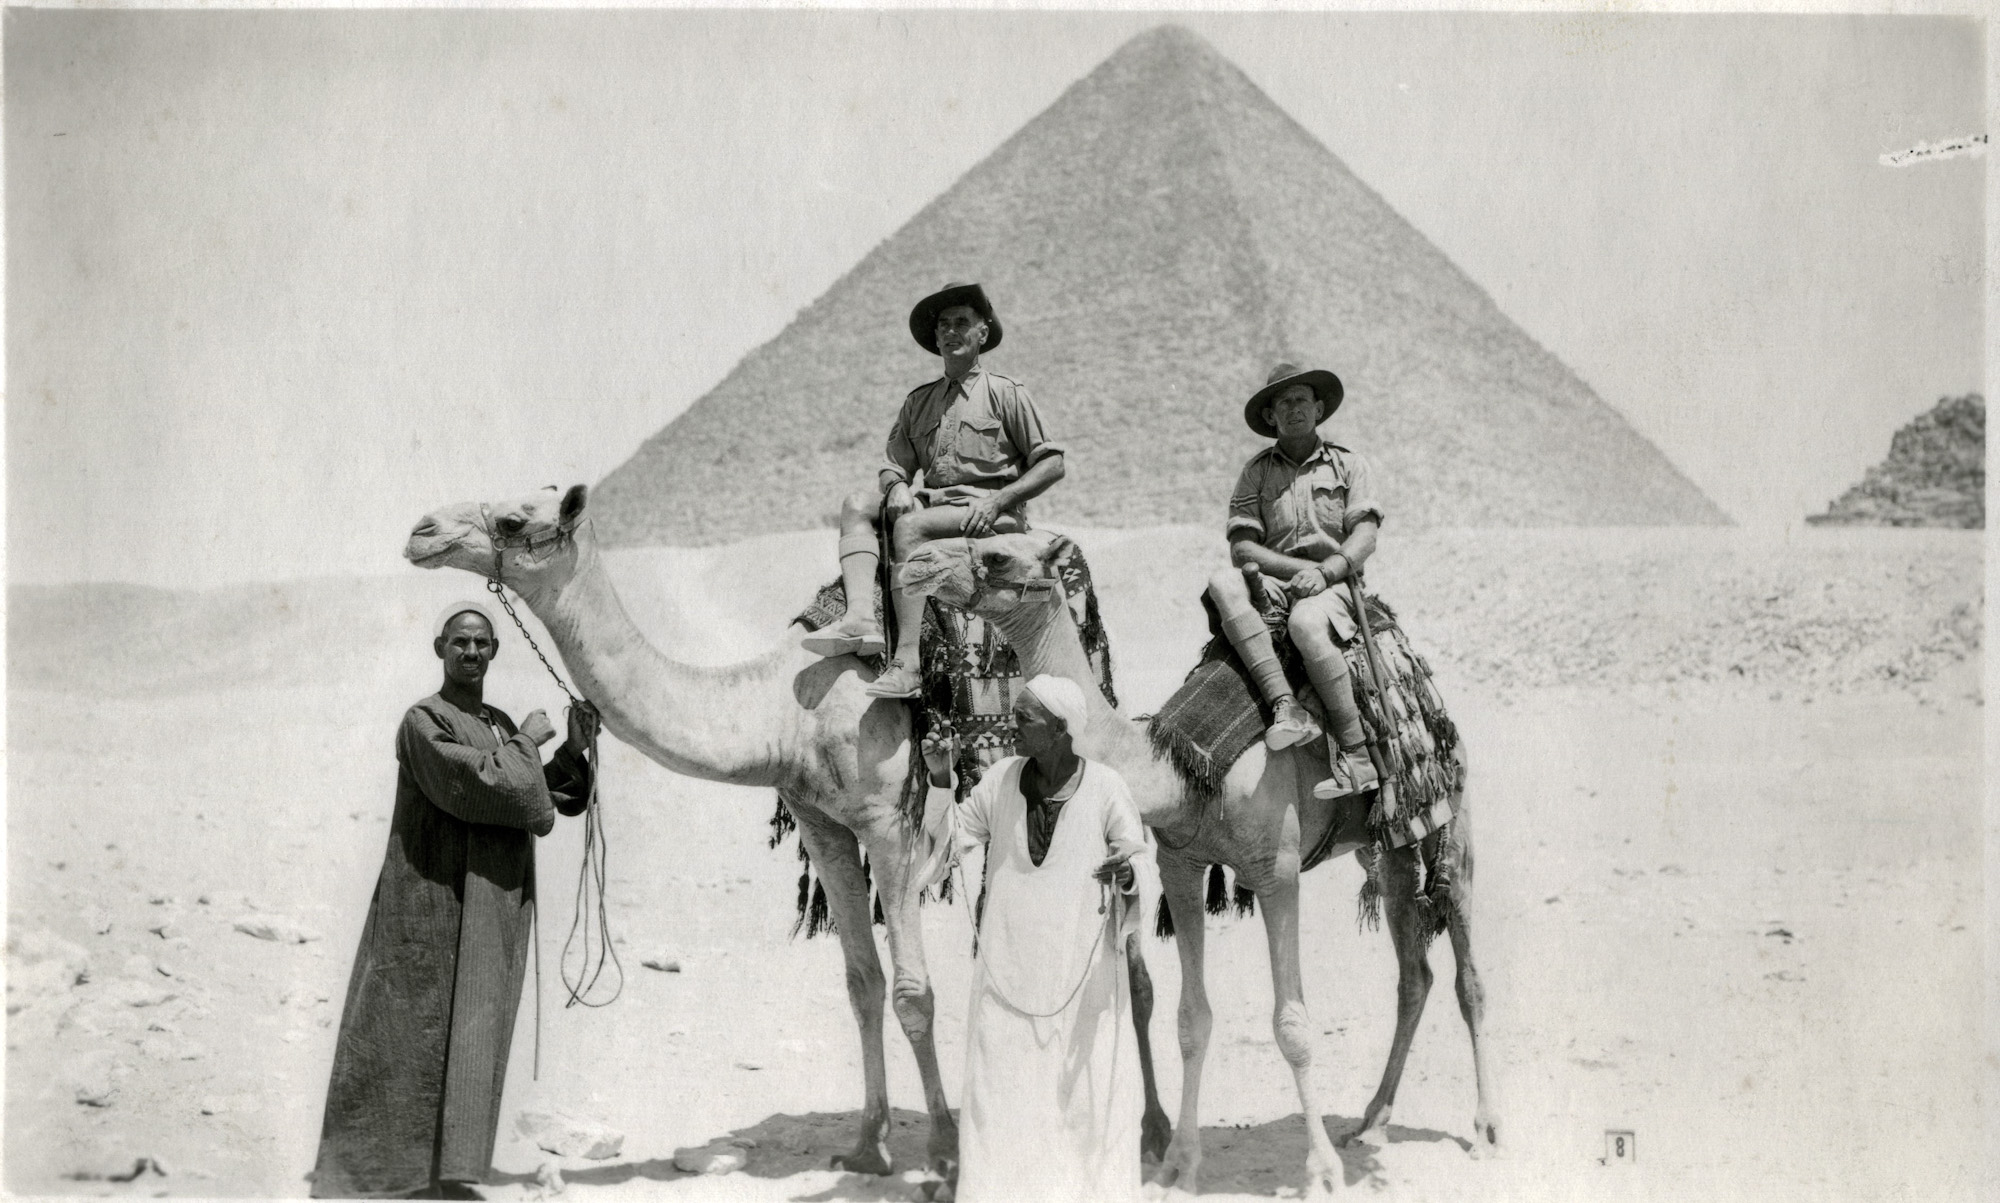 Sgt. John Hudson on leave in Egypt during WWII.
It was John's 2nd trip to the middle East & Egypt having served in WW1 with the the 4th Light Horse fighting against the Turks & their Austrian & Hungarian allies    View full size